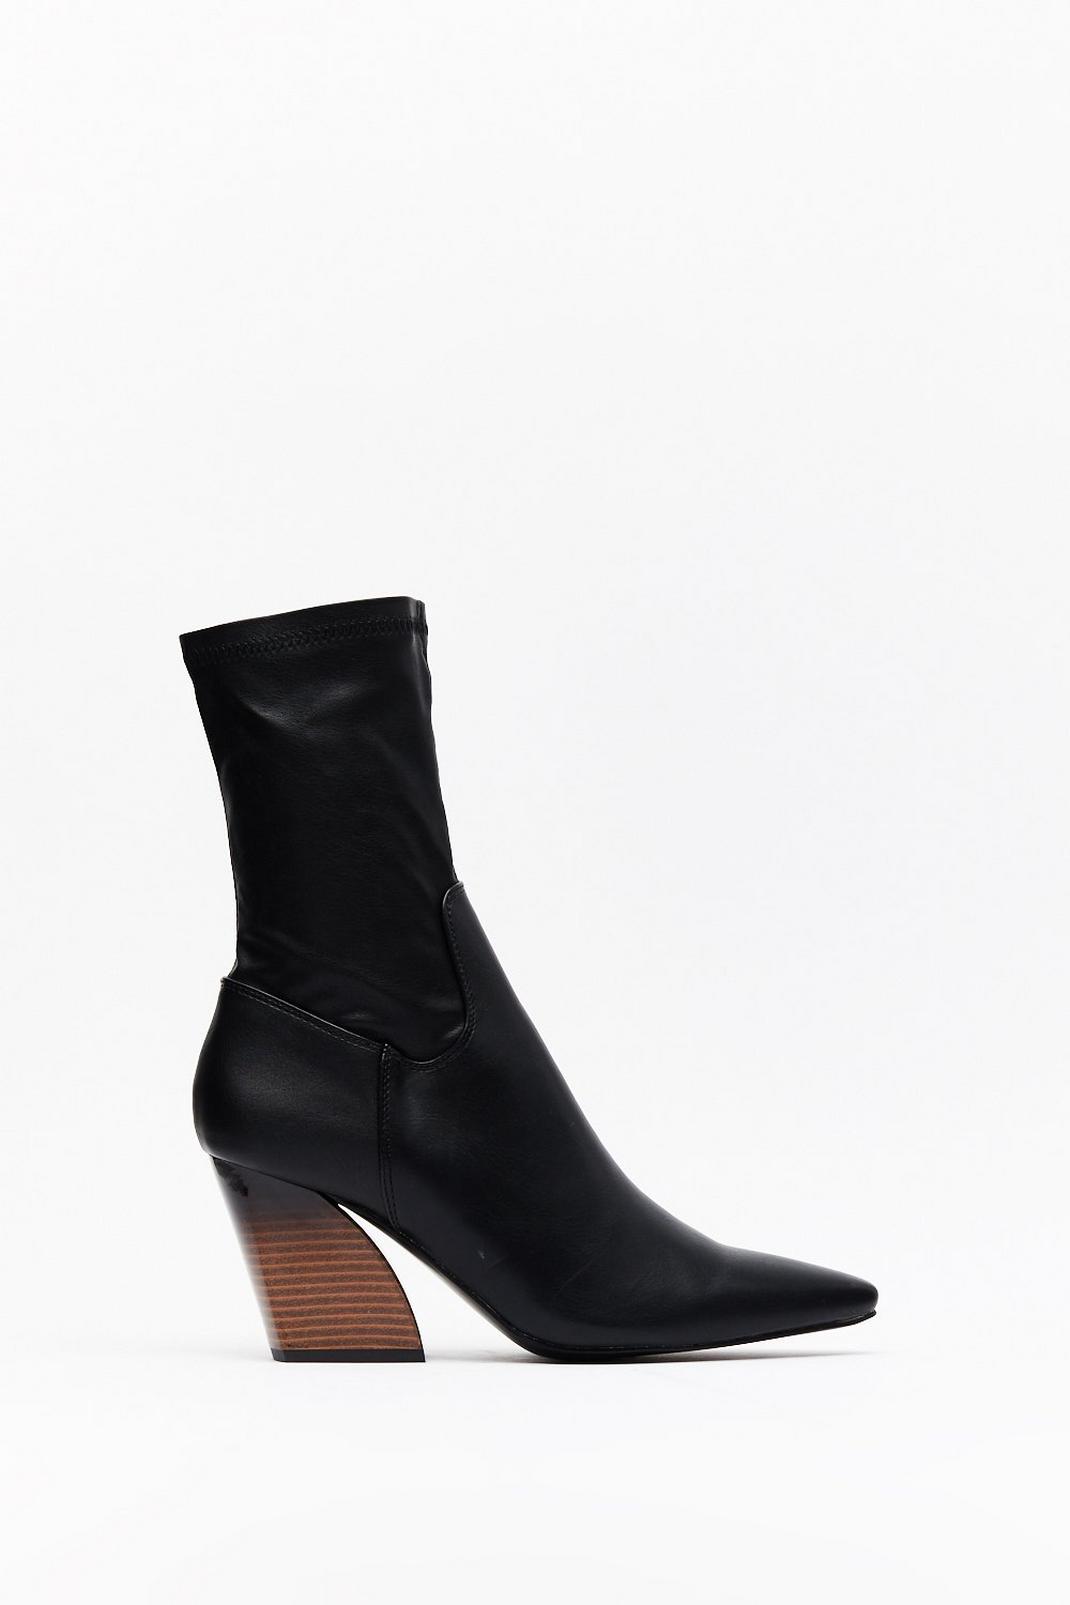 Make Your Point Faux Leather Sock Boots | Nasty Gal